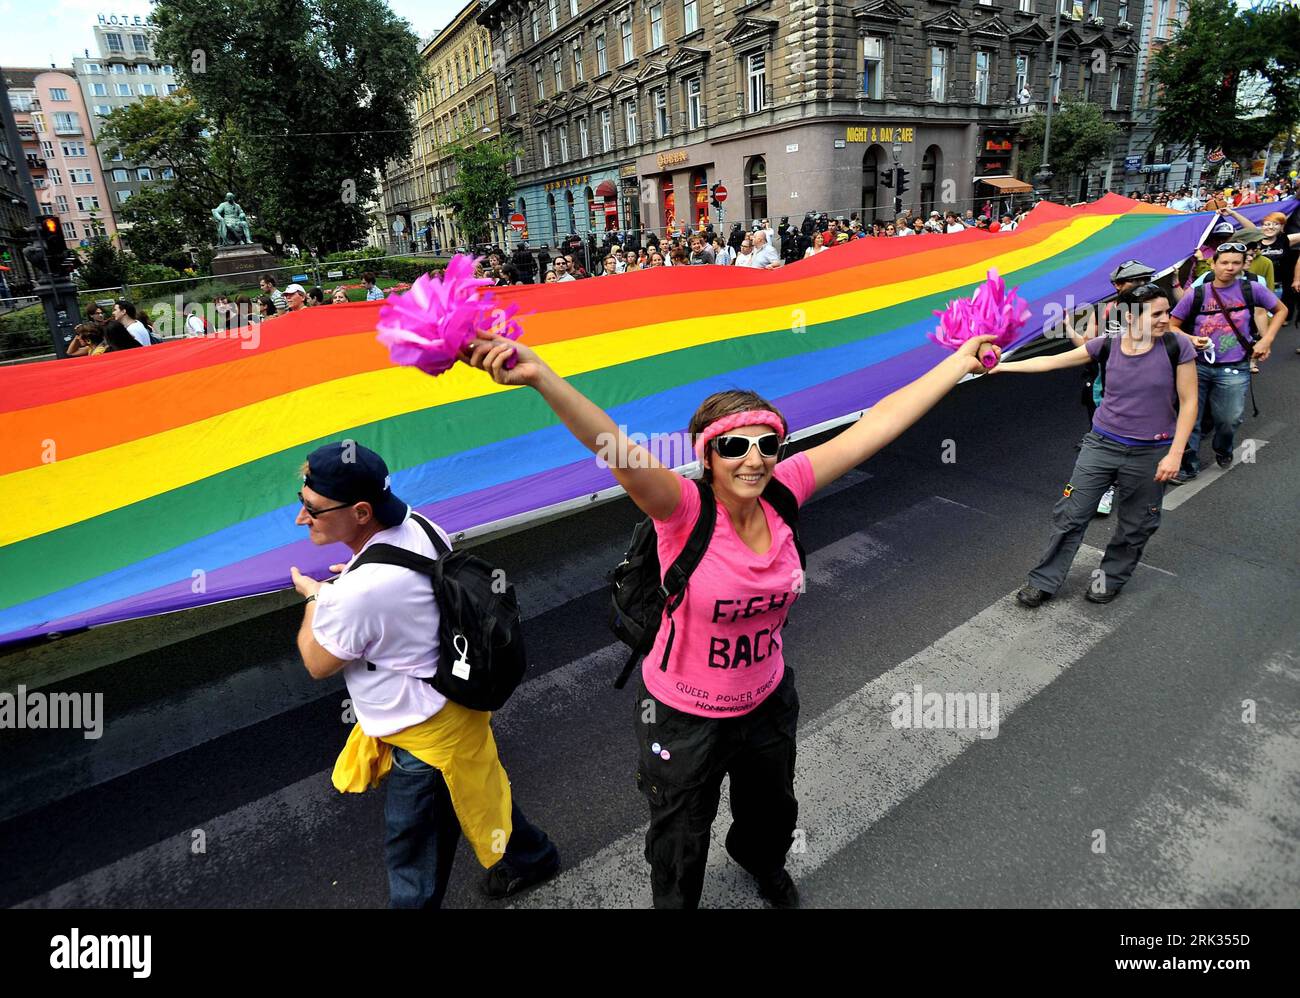 Bildnummer: 53321203  Datum: 05.09.2009  Copyright: imago/Xinhua (090906) -- BUDAPEST, Sept. 6, 2009 (Xinhua) -- Paraders hold a 60-meter-long rainbow flag during the Gay Pride Parade in Budapest, capital of Hungary, Sept. 5, 2009. Some 1,500 secured by police held a Gay Pride Parade here on Saturday. (Xinhua/Kovacs Tamas) (gxr) (1)HUNGARY-BUDAPEST-GAY PRIDE PARADE PUBLICATIONxNOTxINxCHN Homosexualität Ungarn Europa premiumd kbdig xng 2009 quer     Bildnummer 53321203 Date 05 09 2009 Copyright Imago XINHUA  Budapest Sept 6 2009 XINHUA  Hold a 60 Metres Long Rainbow Flag during The Gay Pride Pa Stock Photo